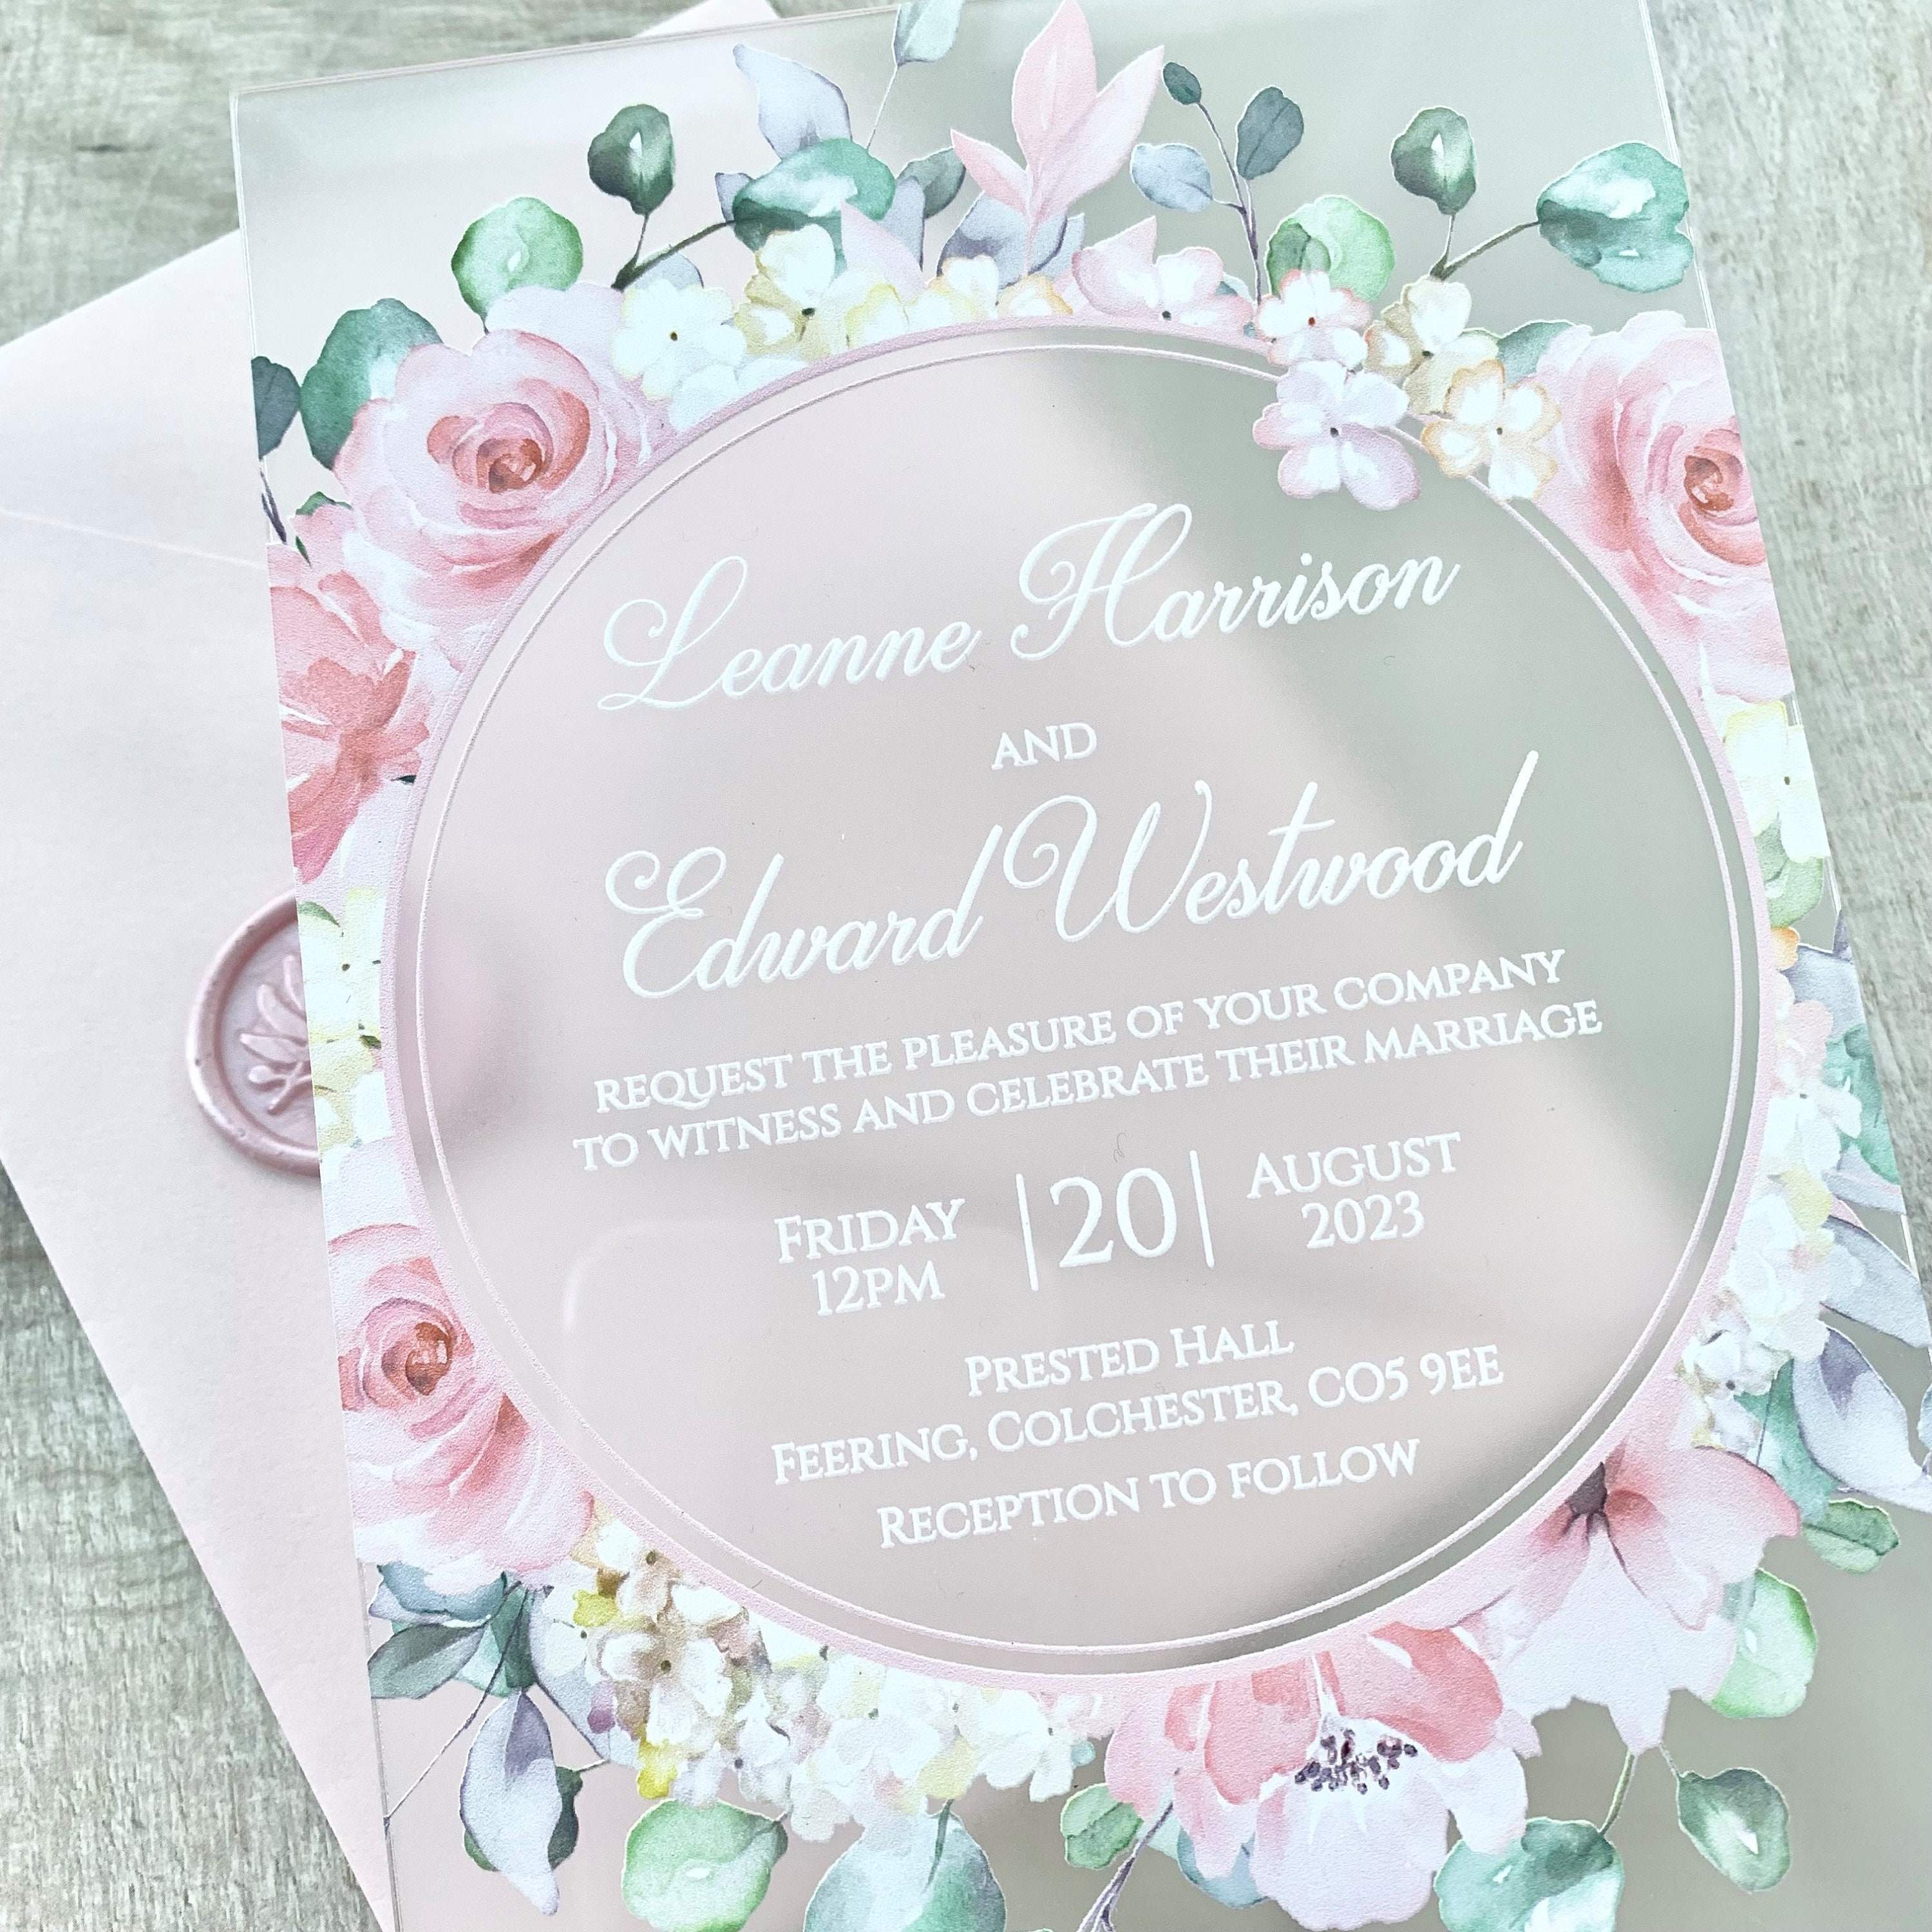 White and Dusty Rose Color Door Style Acrylic Invitations – My